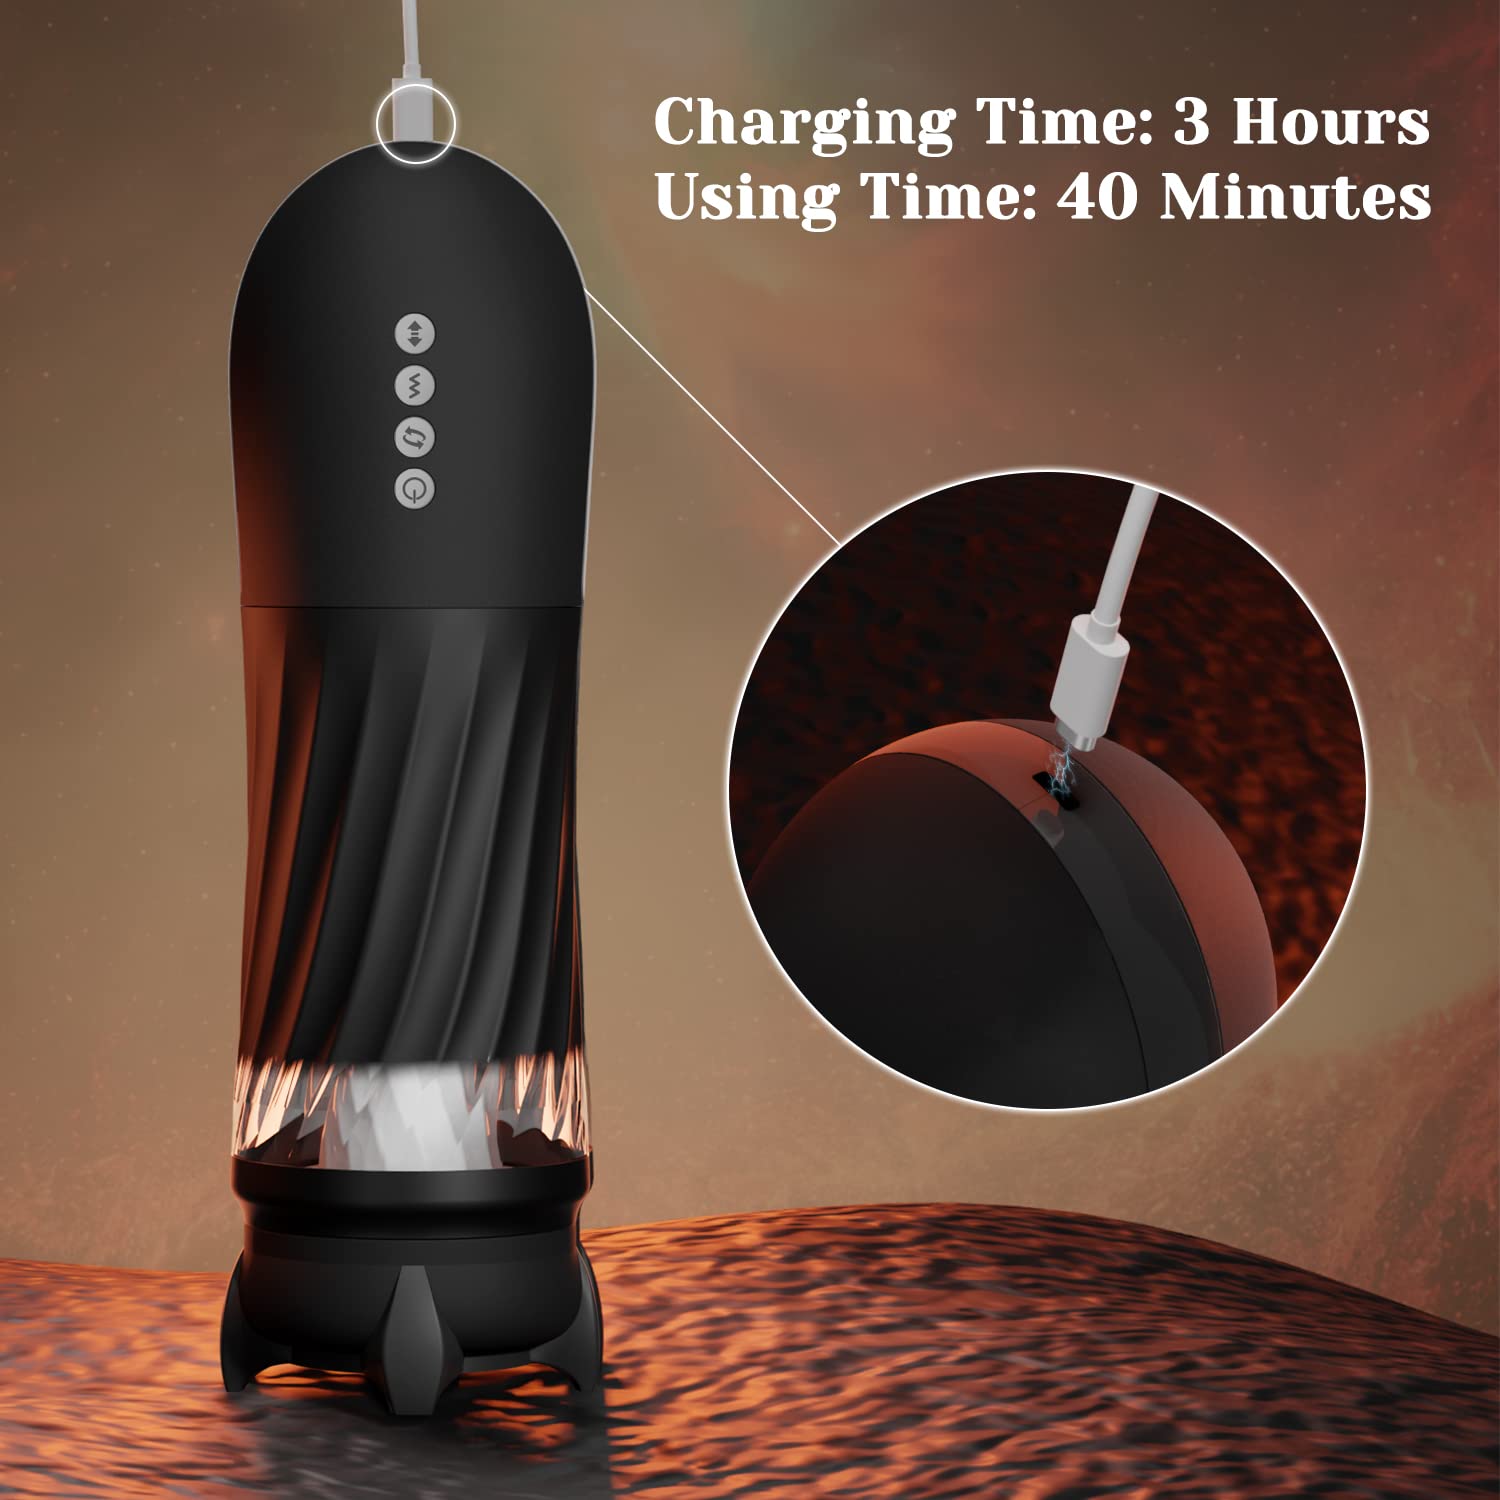 Lurevibe - Rocket 3d Realistic Textured Electric Stroker With 5 Thrusting Rotating Modes - Lurevibe